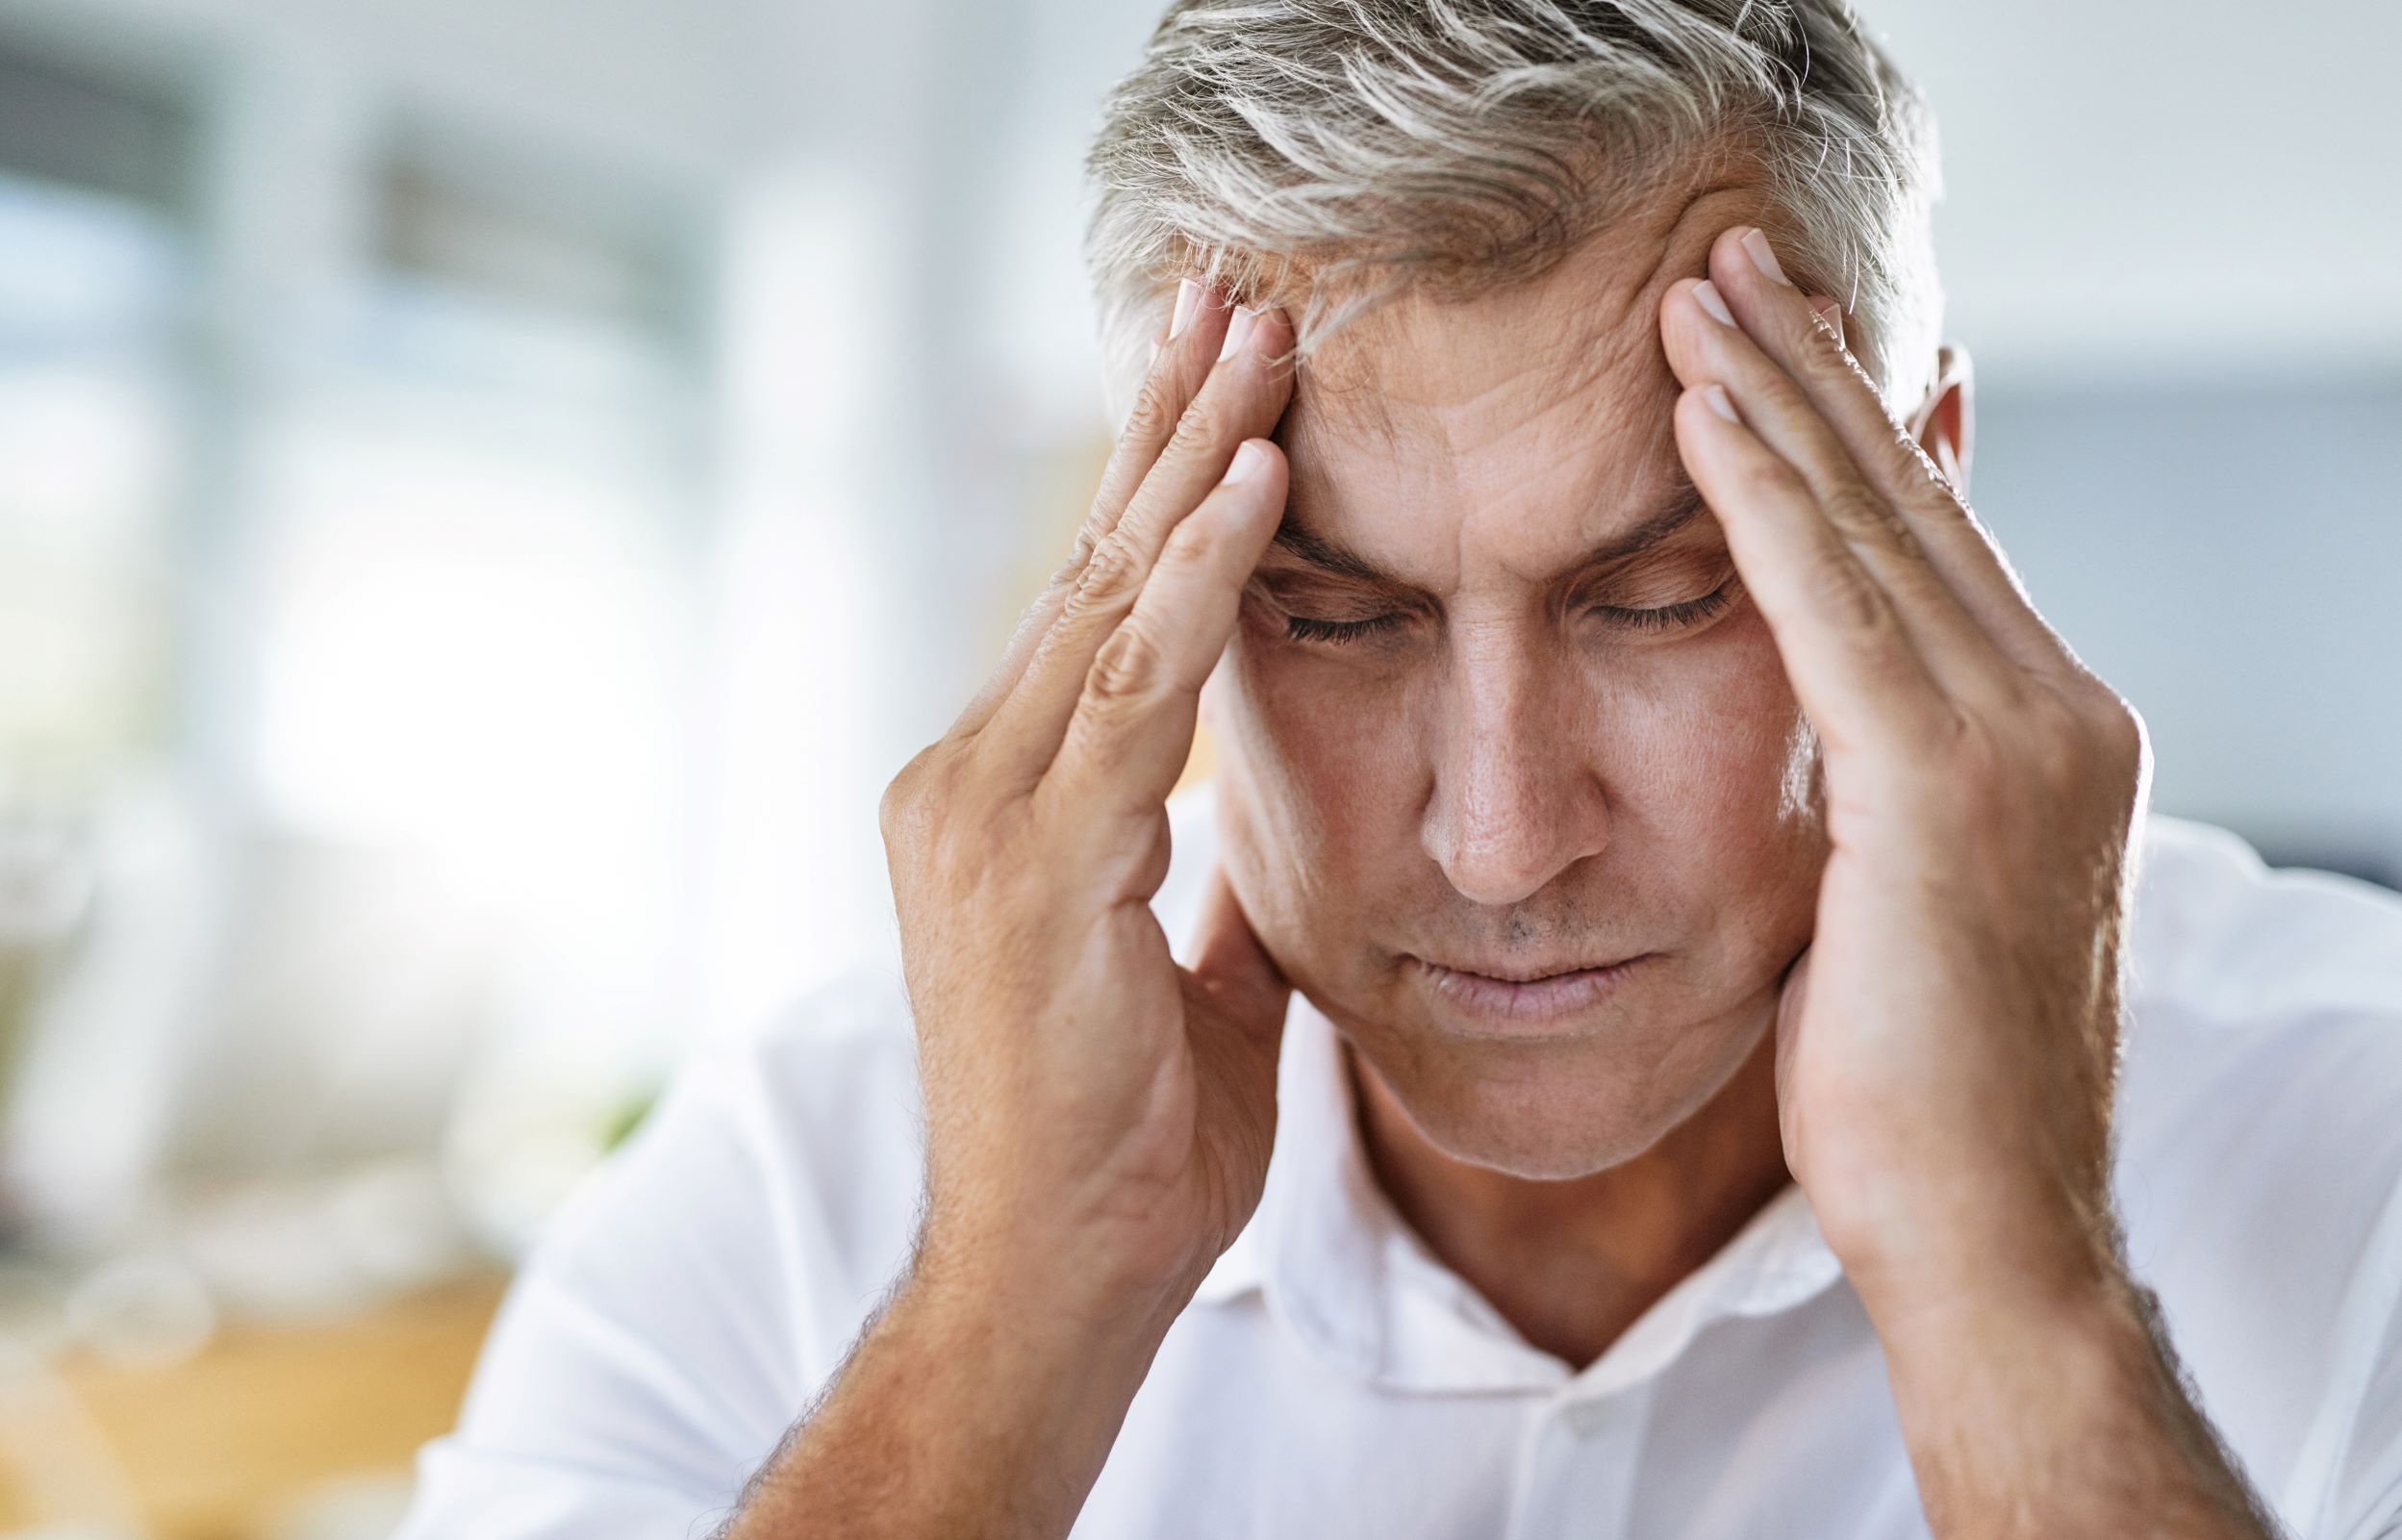 Headaches due to tooth clenching are among the many negative effects of misaligned teeth.